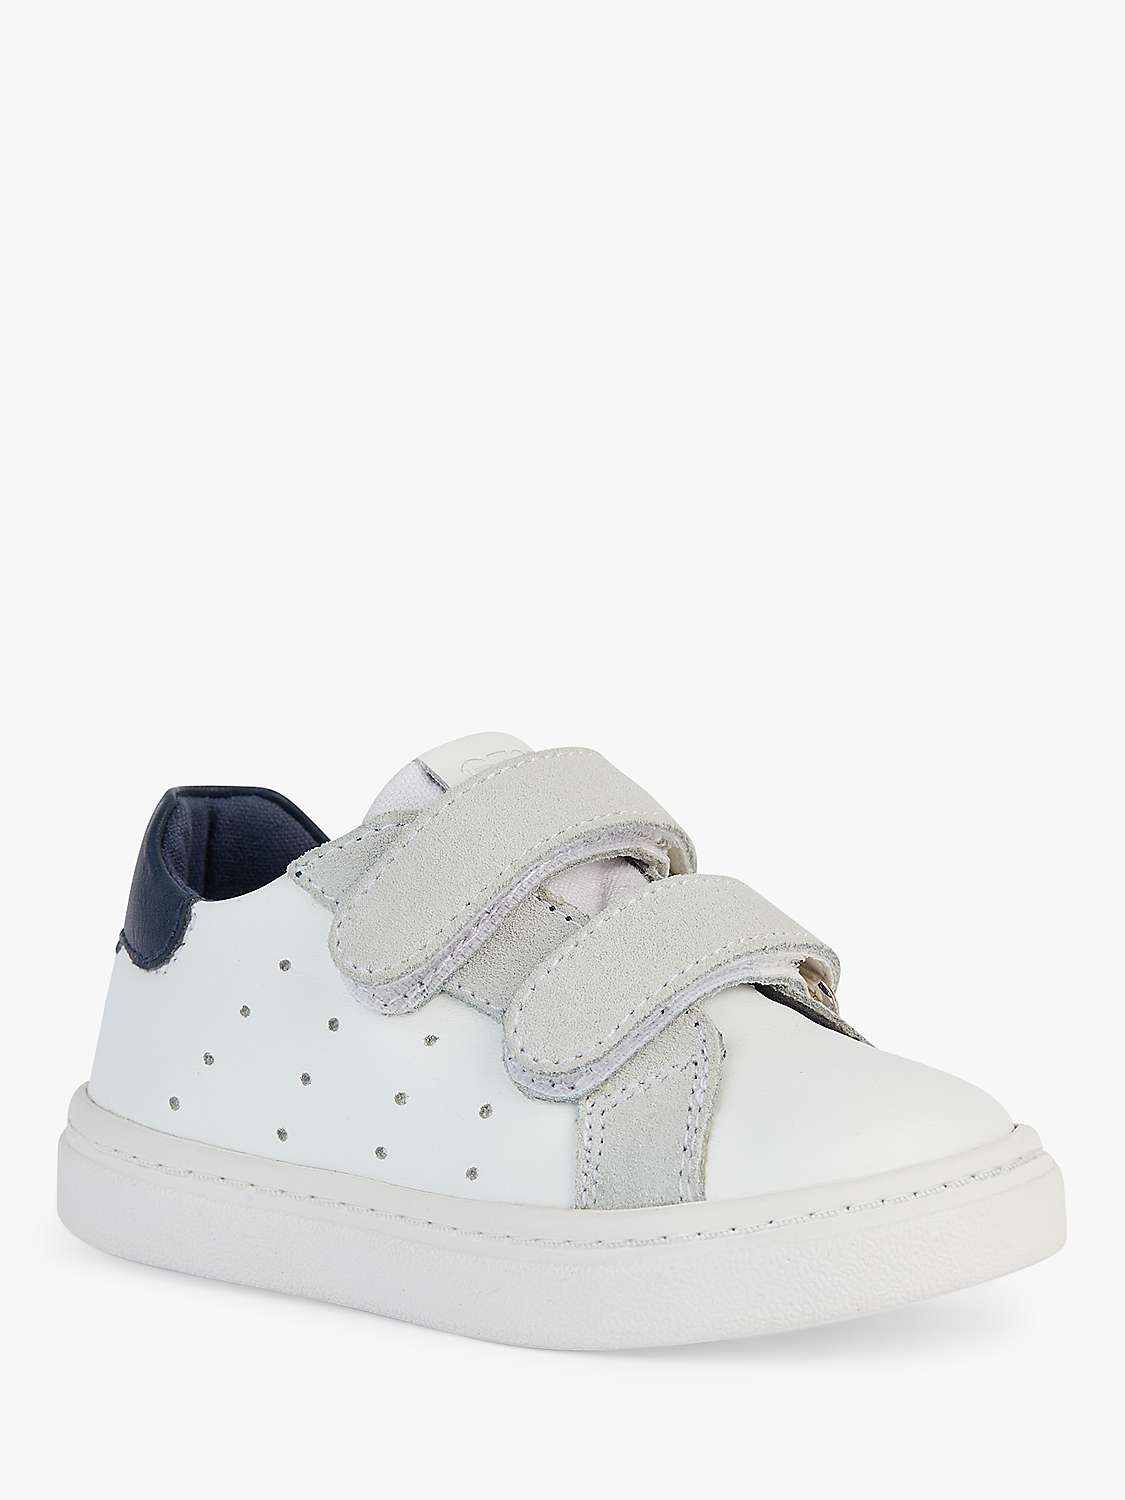 Buy Geox Baby Nashik Nappa Suede First Steps Trainers, White/Navy Online at johnlewis.com